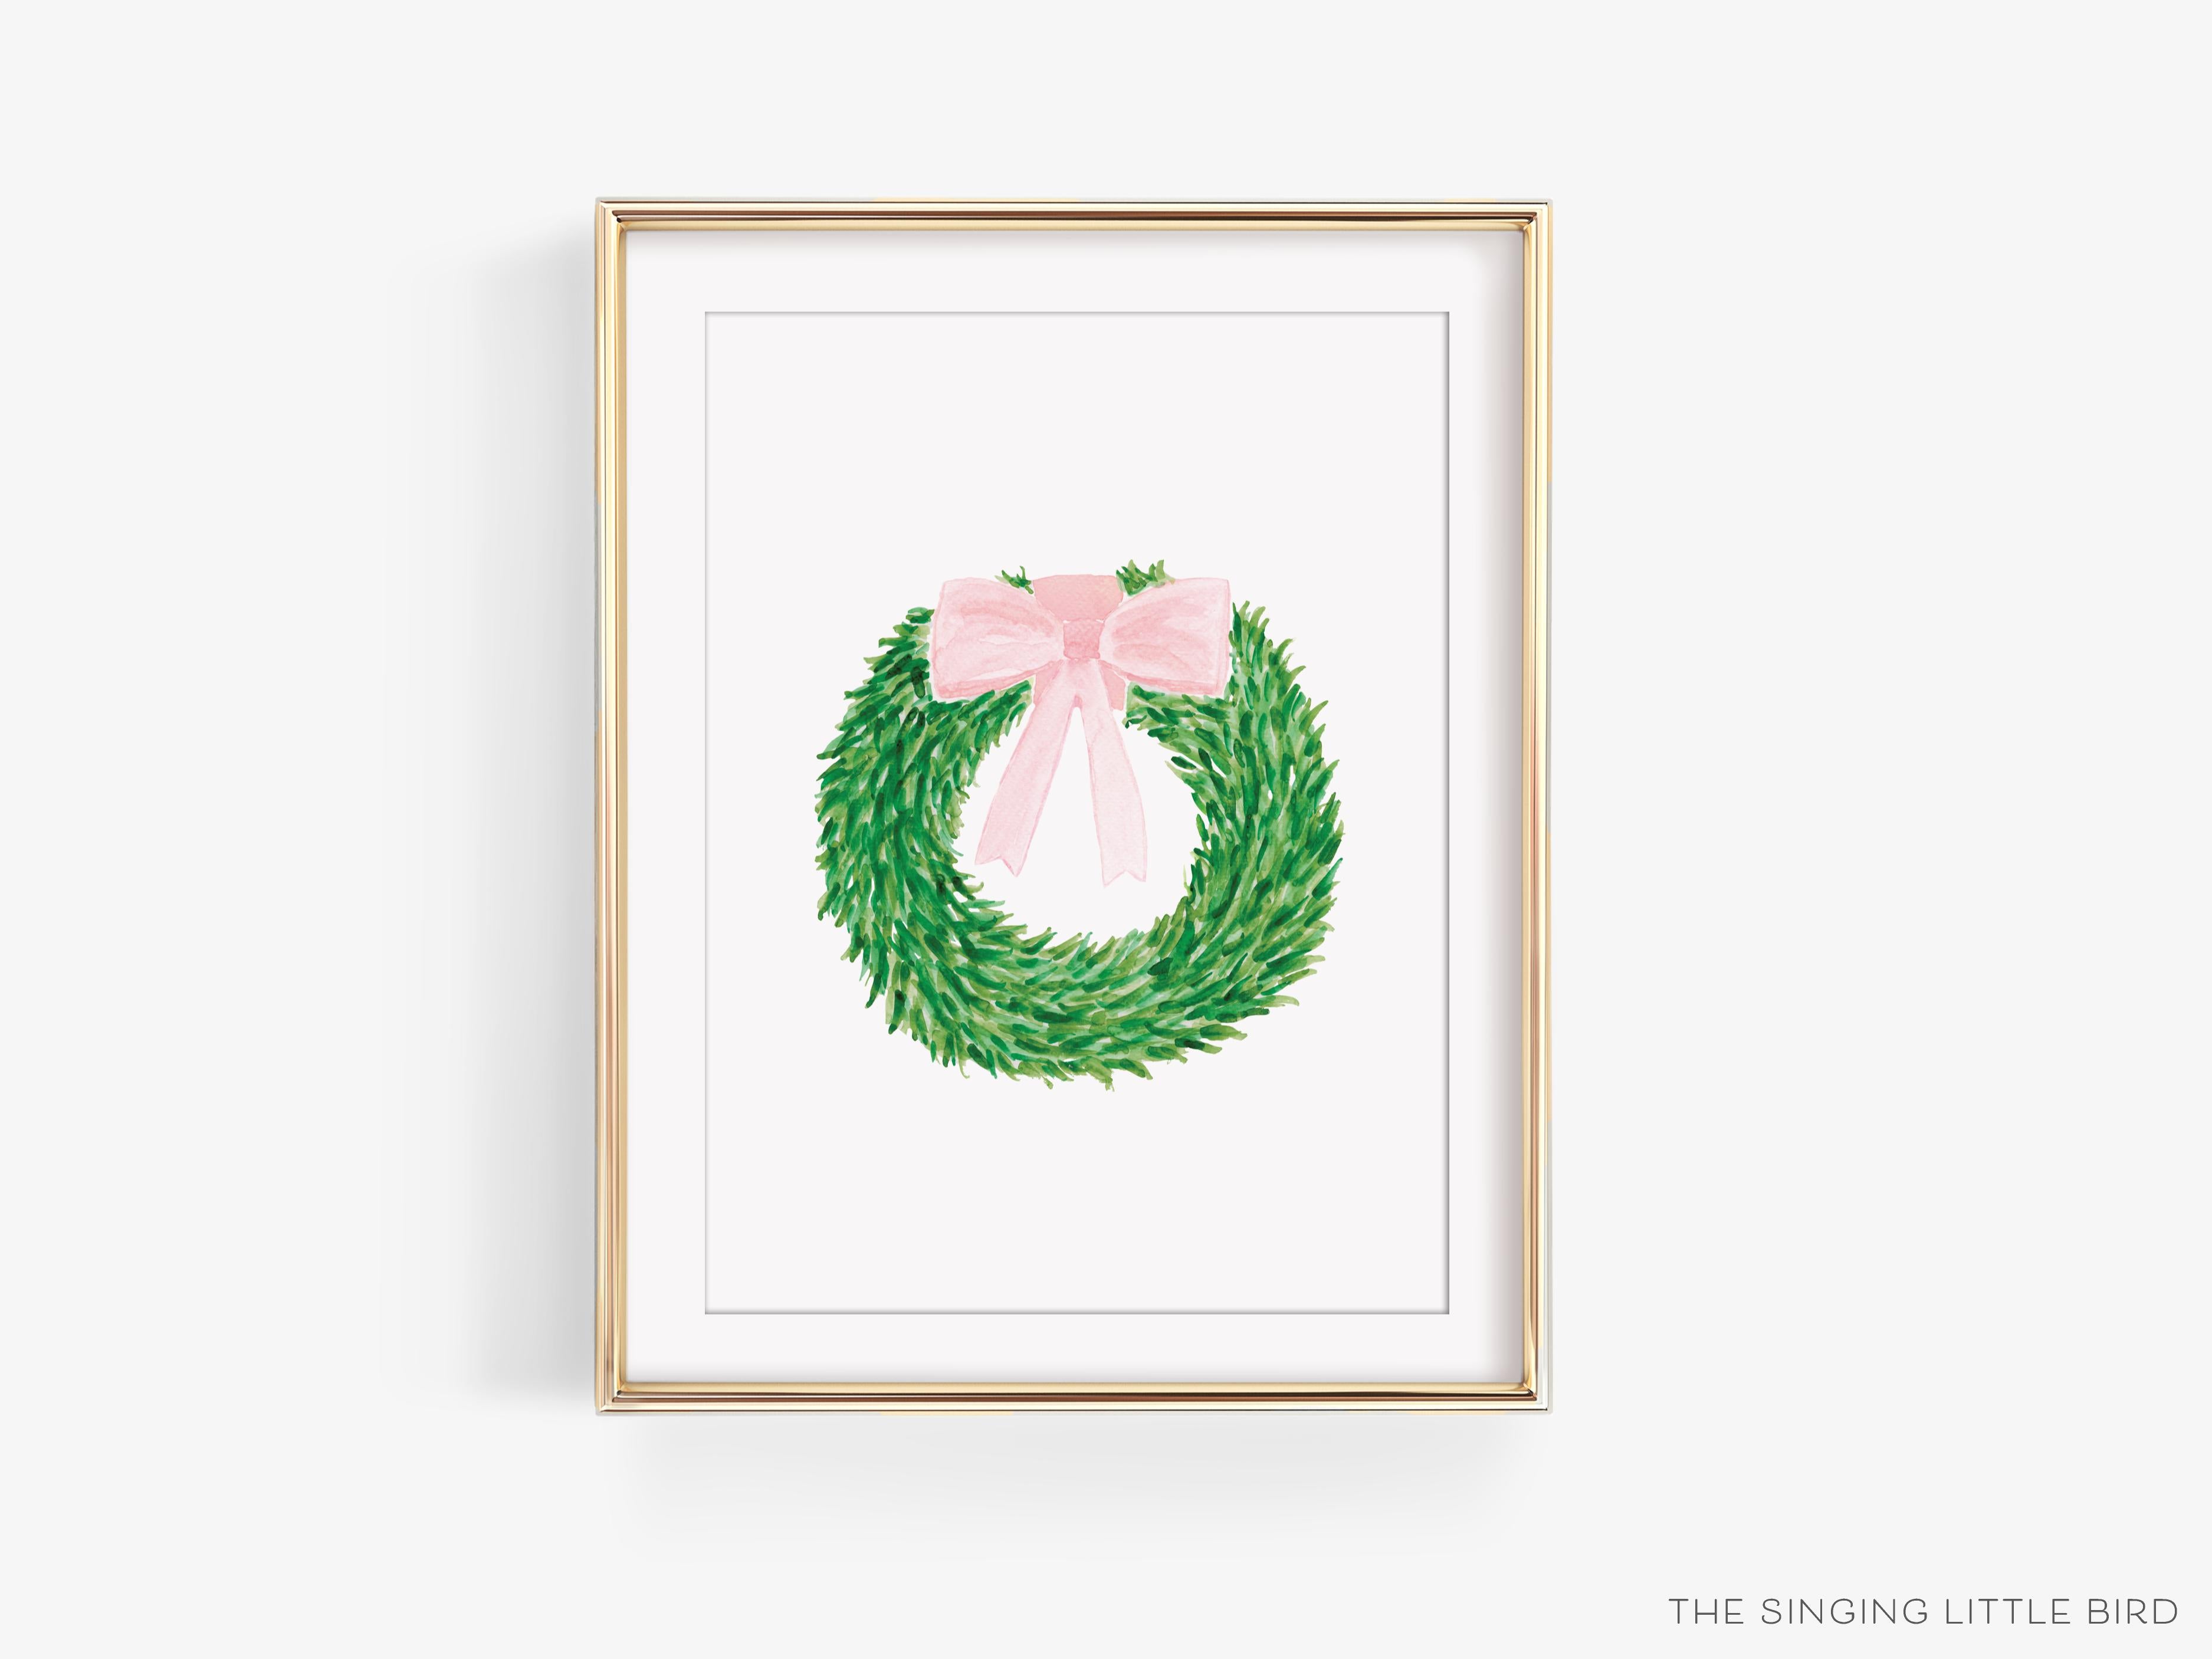 Wreath with Pink Bow Art Print-This watercolor art print features our hand-painted wreath with bow, printed in the USA on 120lb high quality art paper. This makes a great gift or wall decor for the spring time lover in your life.-The Singing Little Bird